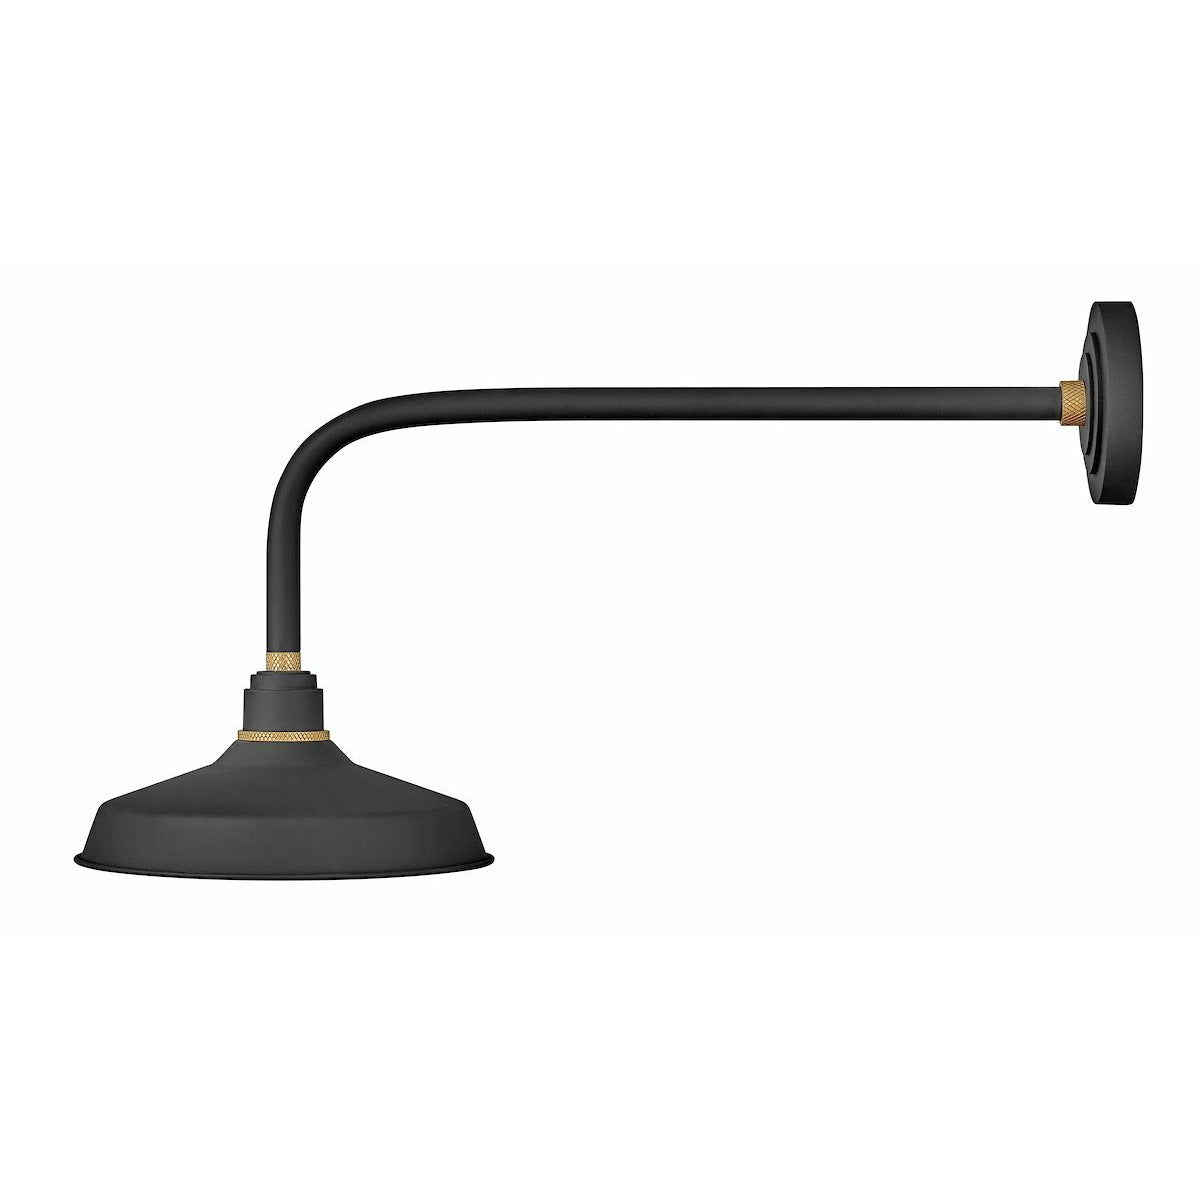 Foundry Classic Outdoor Wall Light Textured Black